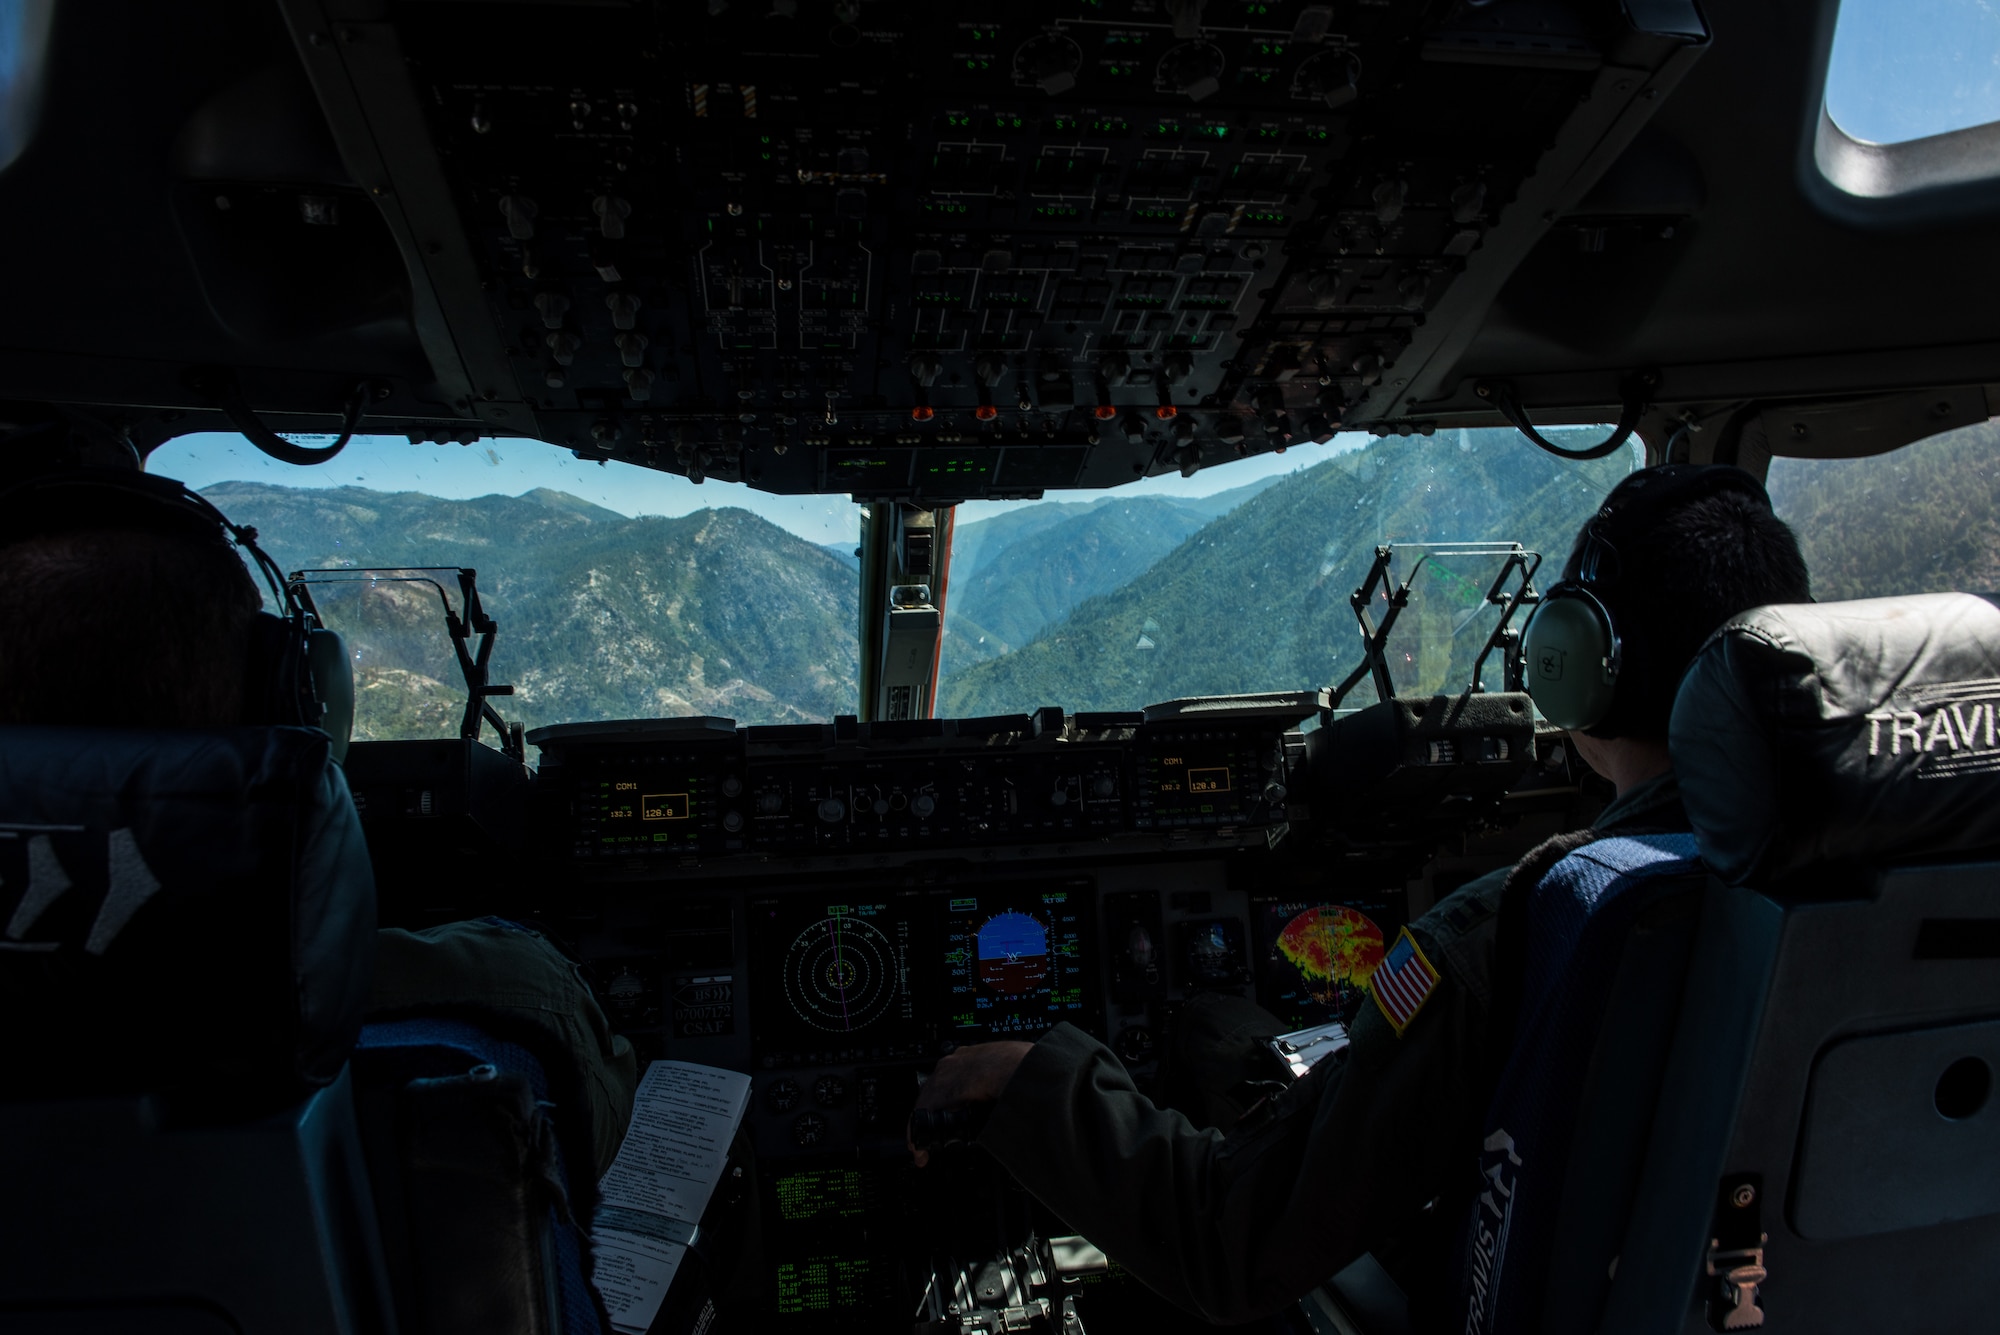 U.S. Air Force Capt. Sean Harte, right, 60th Air Mobility Wing Safety Office flight commander, and Capt. Doc Schumacher, 21st Airlift Squadron C-17 Globemaster III pilot, fly a C-17 over California during a safety office familiarization flight, July 2, 2018. The flight allowed Matt Stevens, a U.S. Department of Agriculture airport biologist, who helps manage the Bird/Wildlife Aircraft Strike Program at Travis Air Force Base, Calif., to get a firsthand view of what pilots see during training flights near the base. (U.S. Air Force photo by Master Sgt. Joey Swafford)